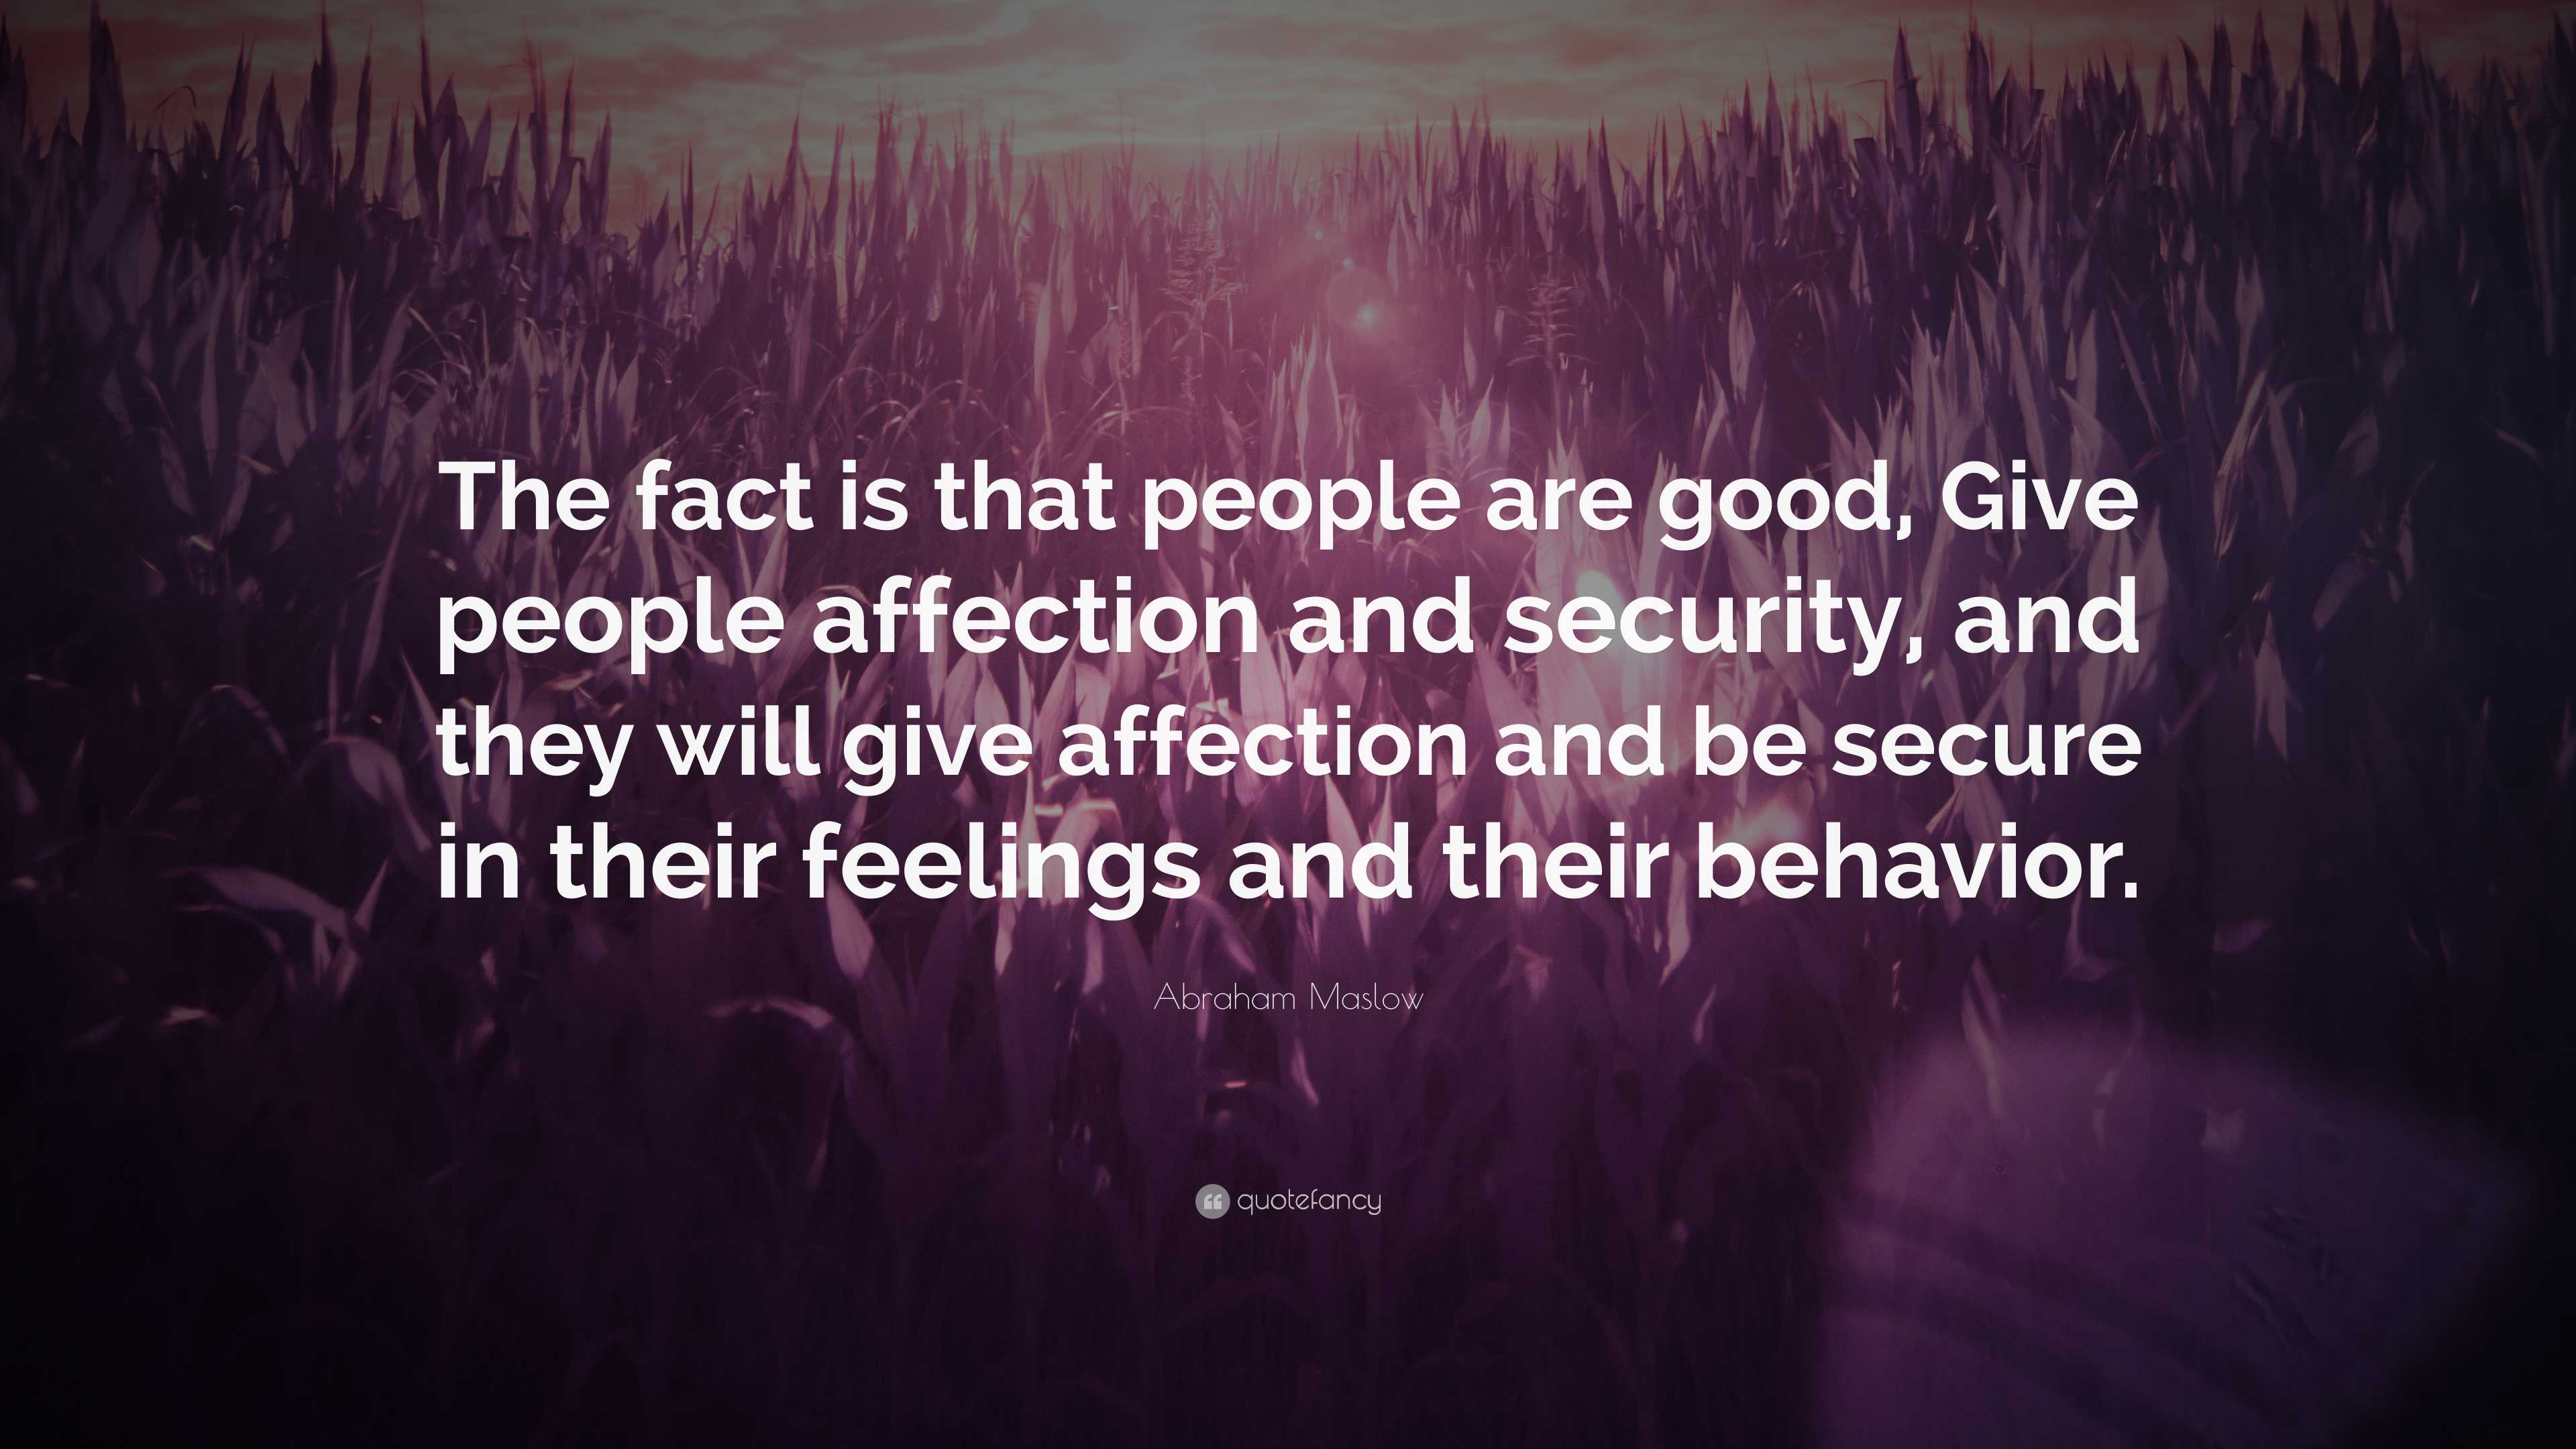 Abraham Maslow Quote: “The fact is that people are good, Give people ...